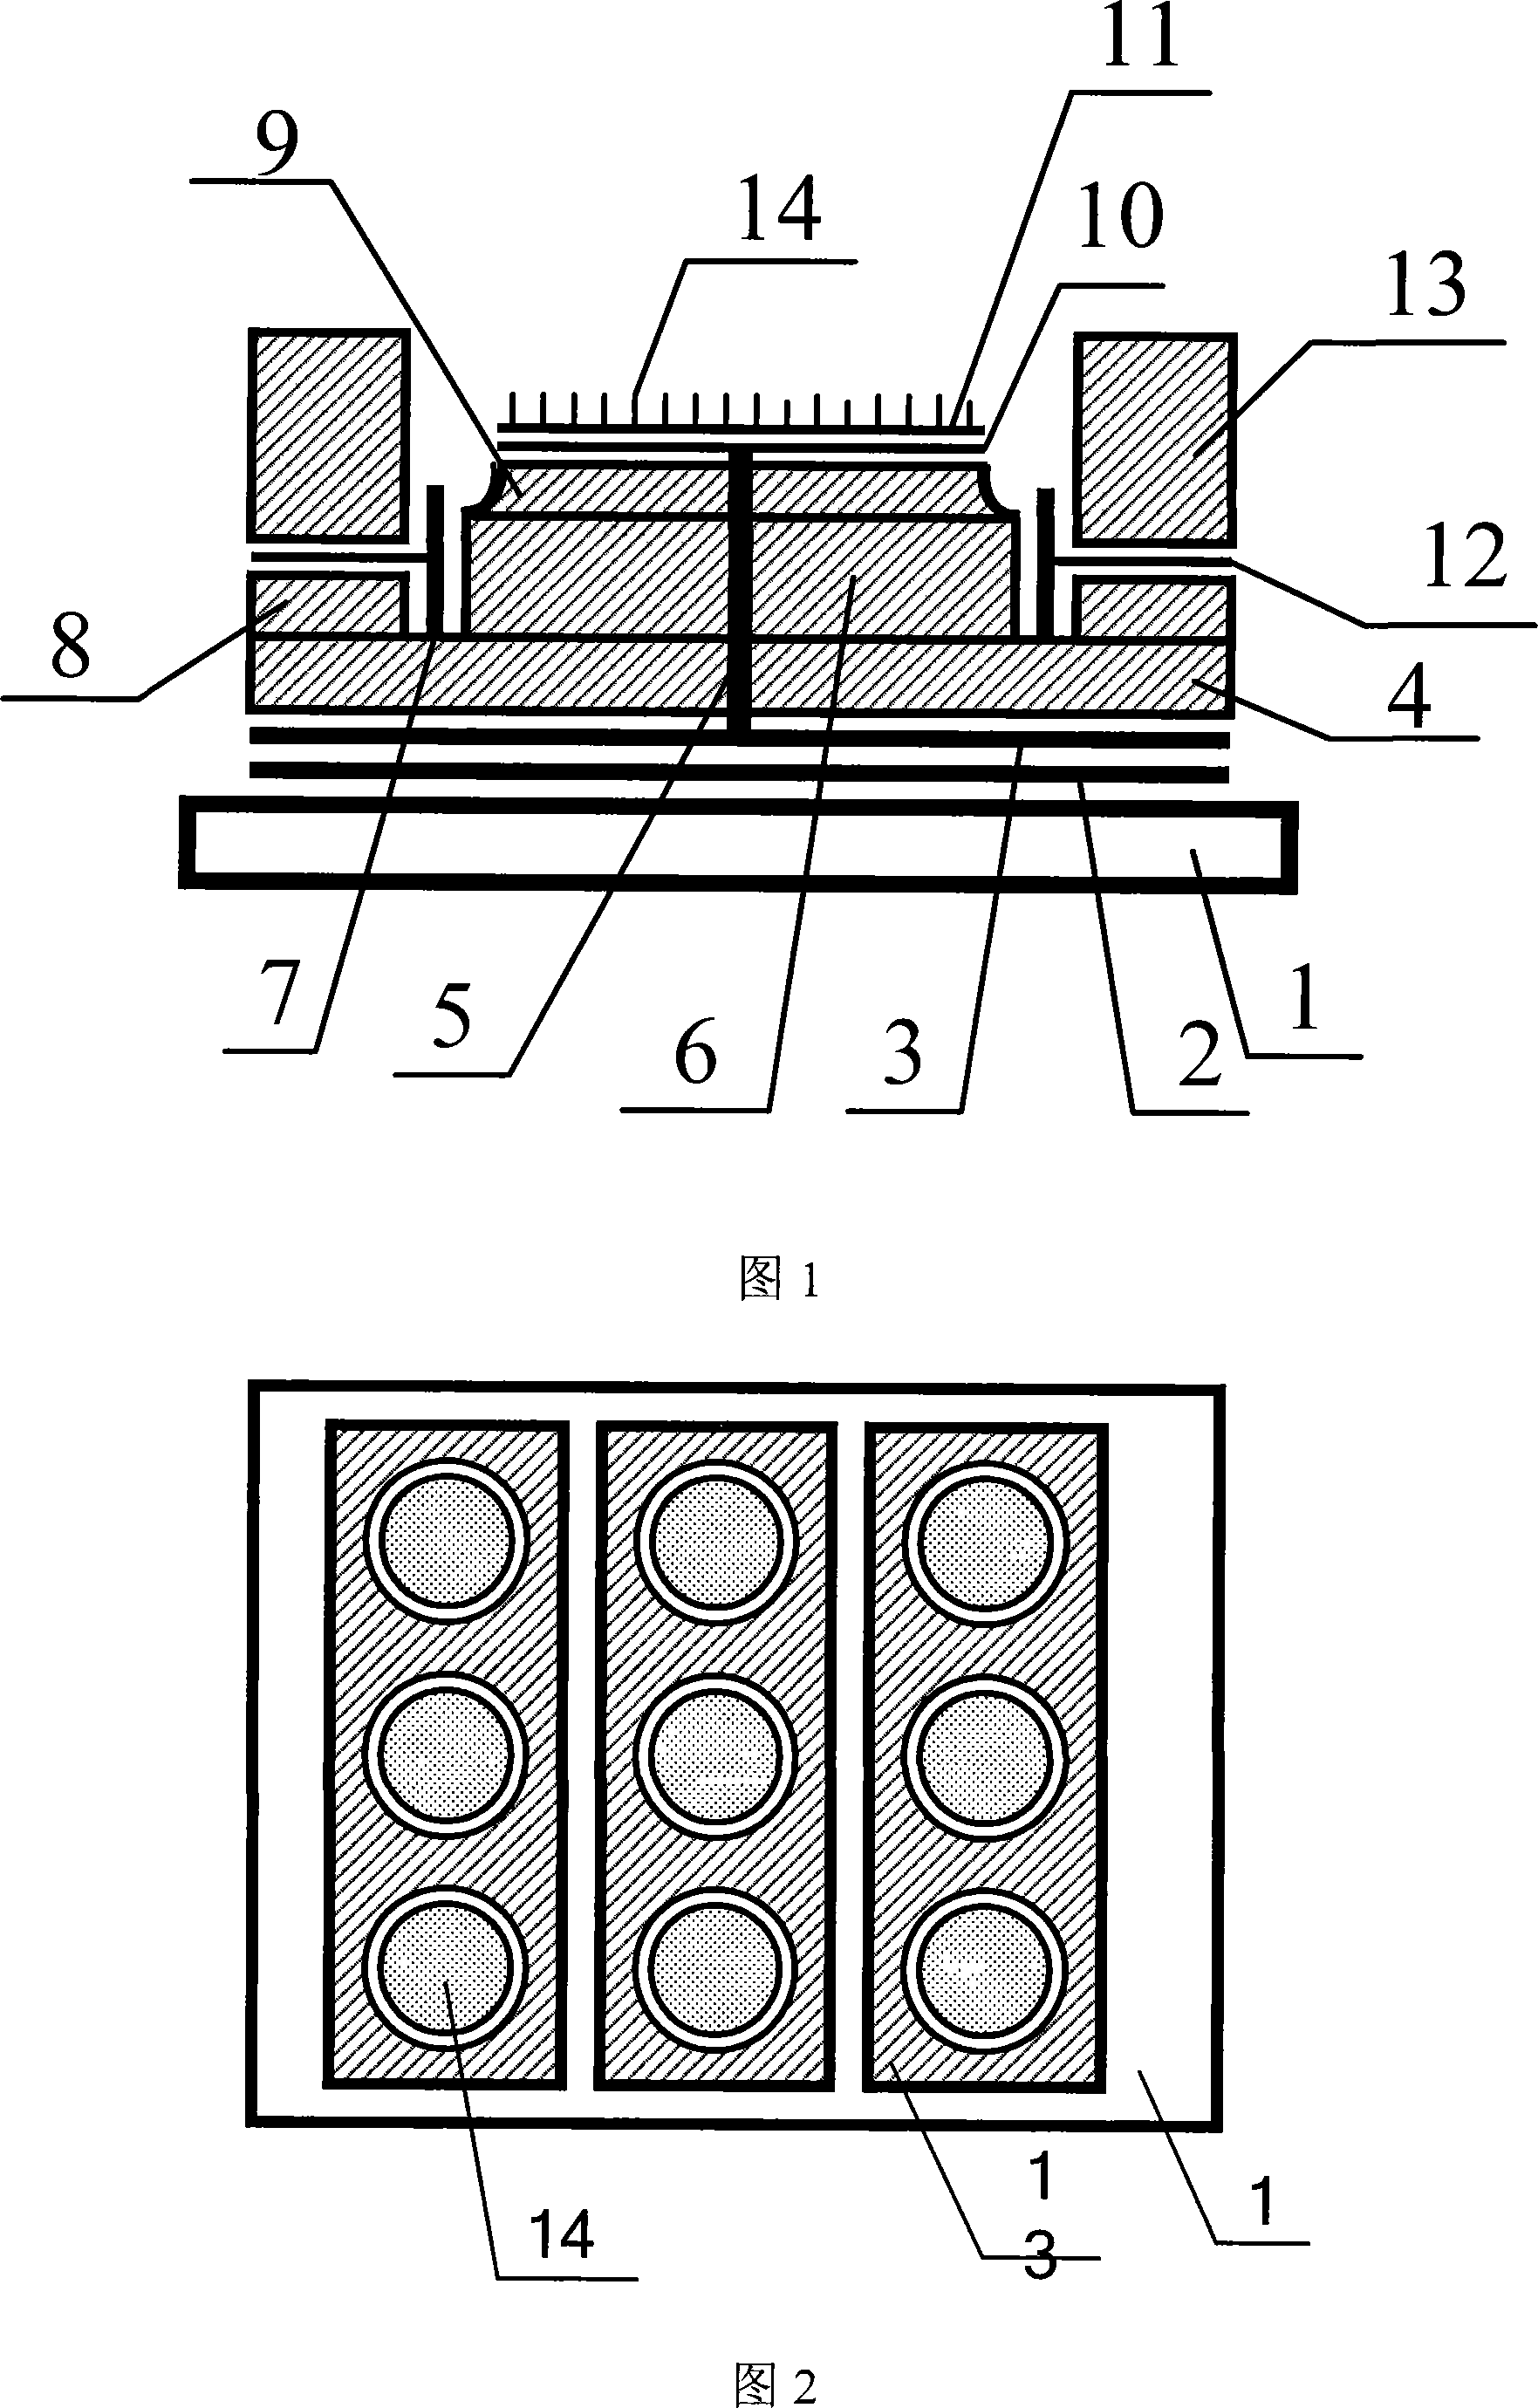 Flat-panel display device with inclined-down gate-modulated flat cadhode structure and its preparing process